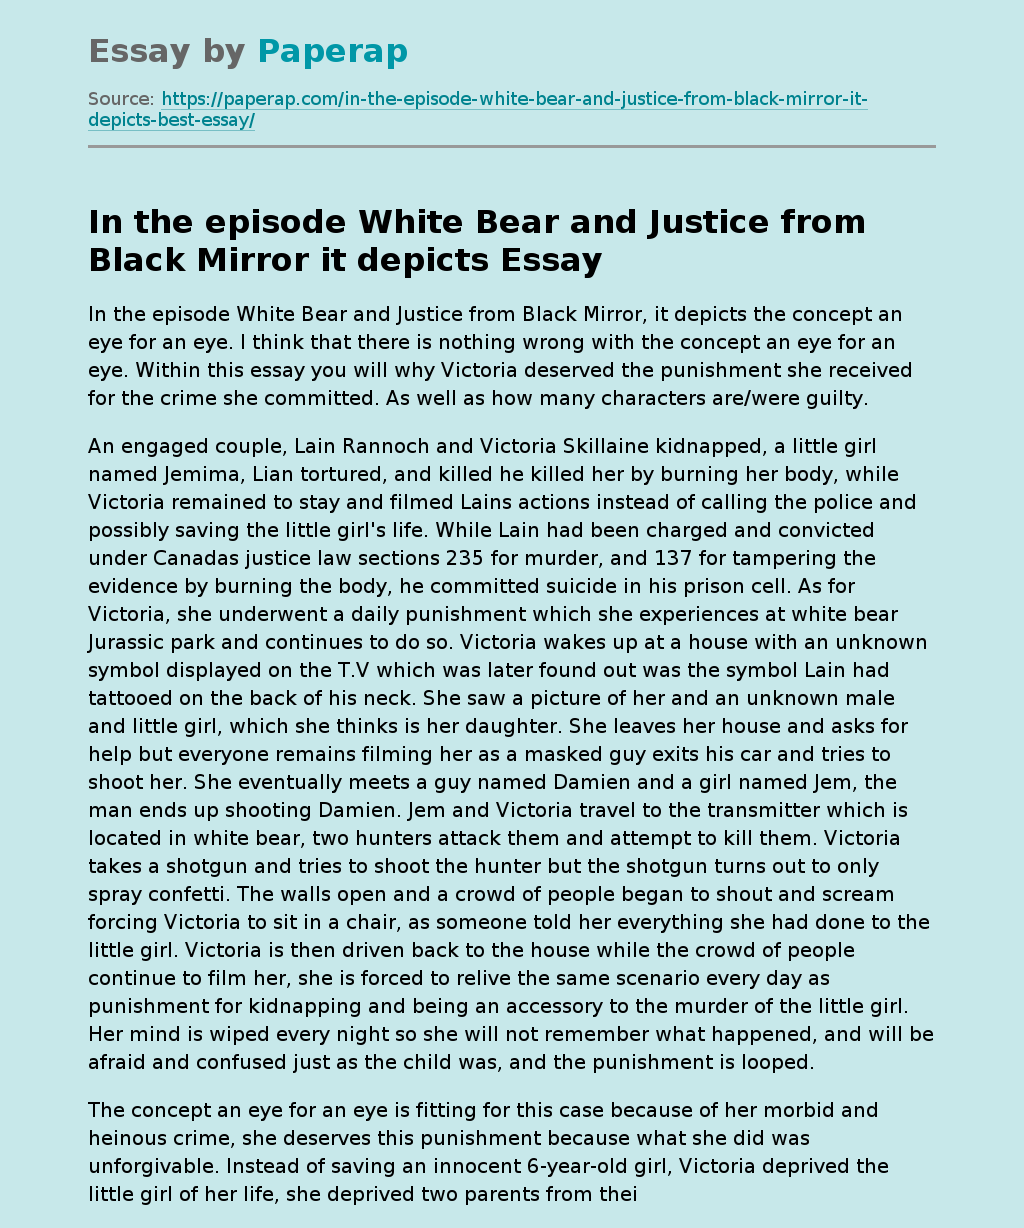 In the episode White Bear and Justice from Black Mirror it depicts